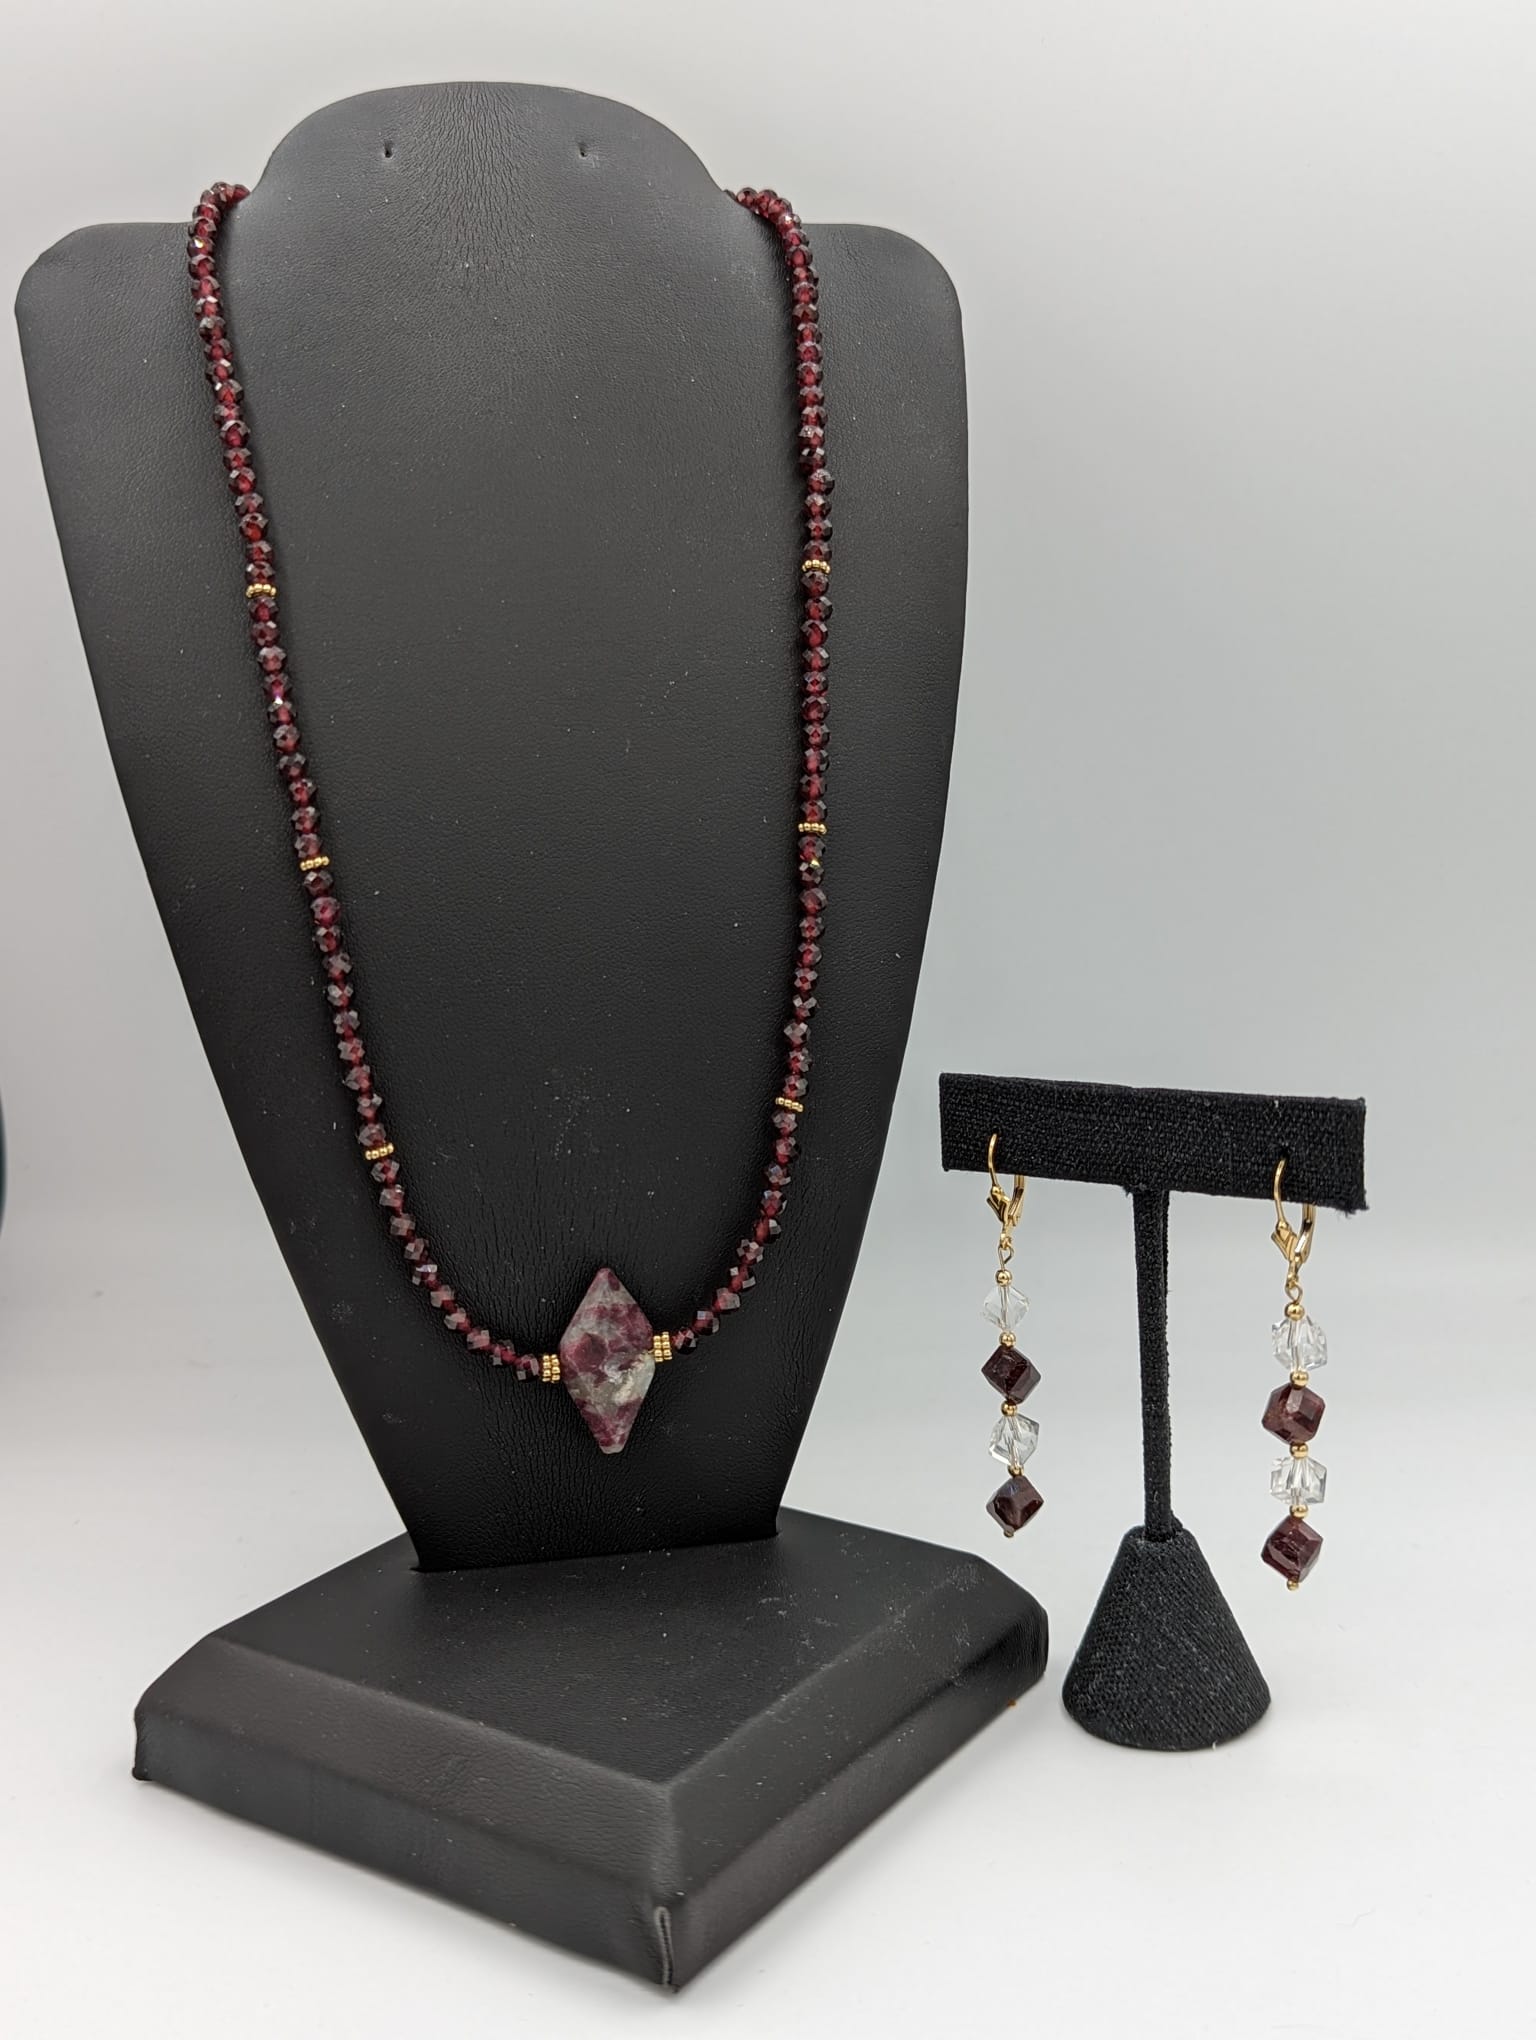 14K Gold-filled Handcrafted Garnet and Crystal Quartz Earrings